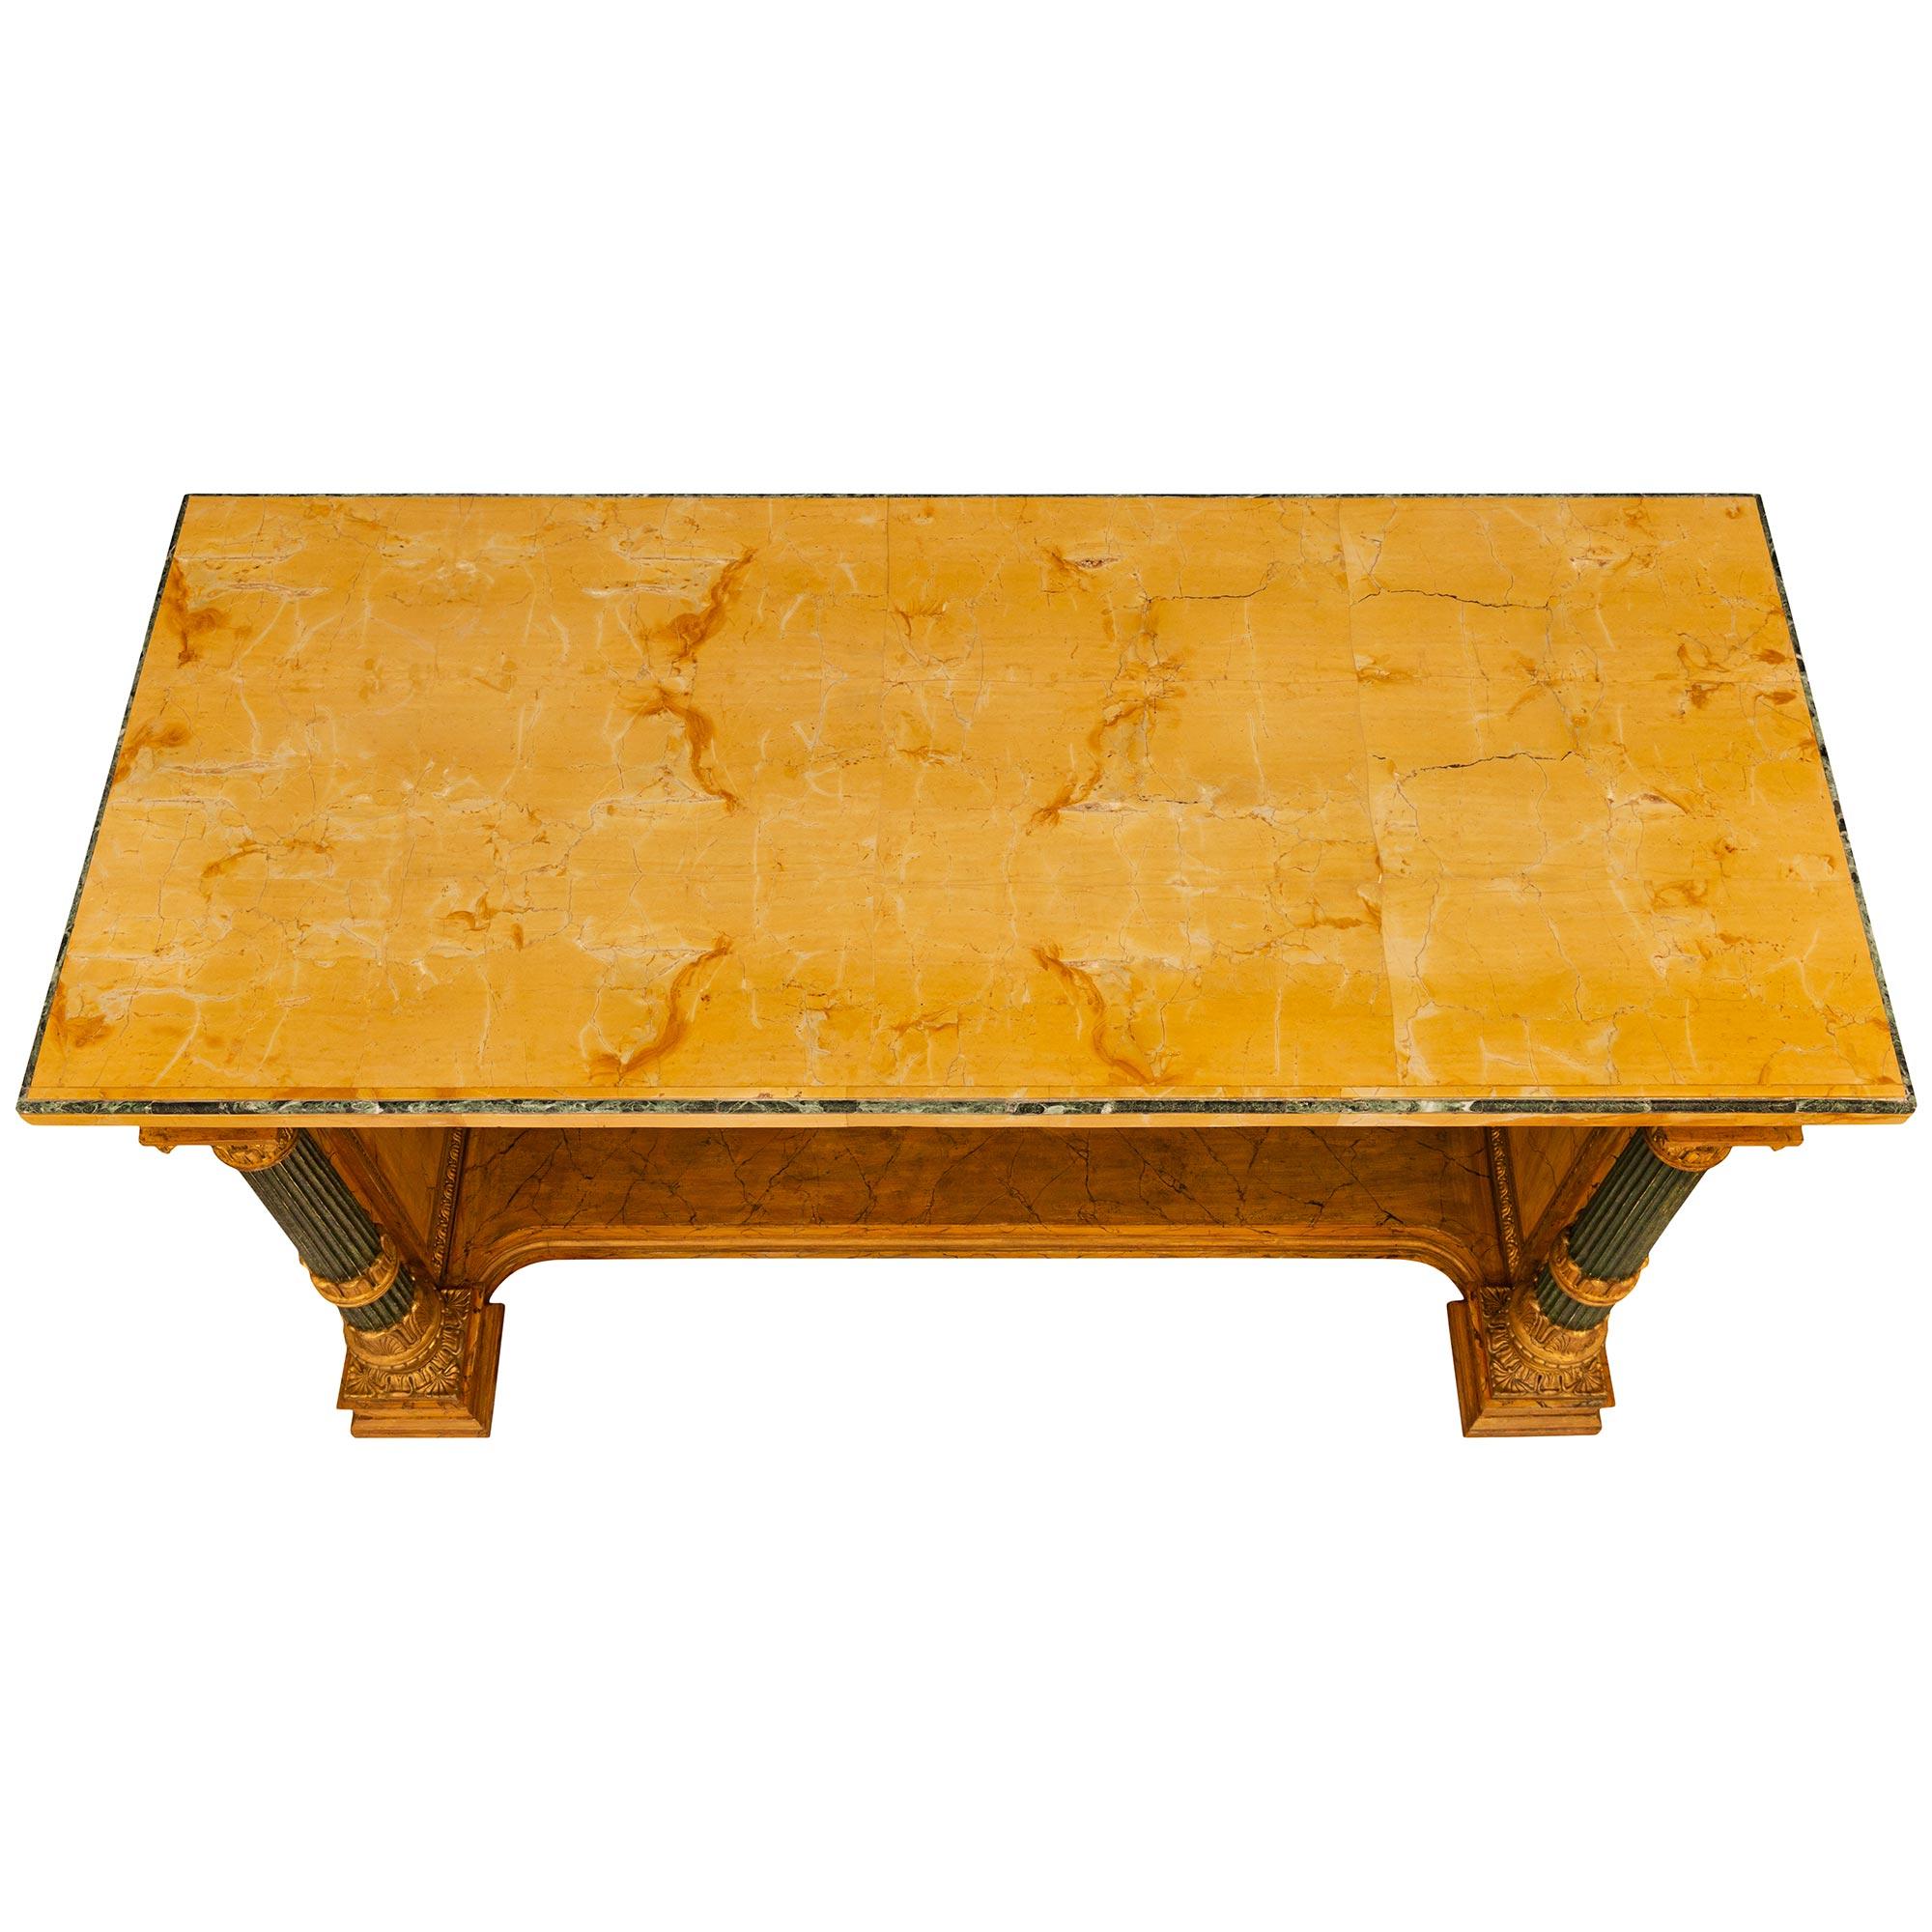 A high quality and beautiful Italian 19th century Neo-Classical st. Sienna, Giallo Antico, faux painted marble, patinated wood and Giltwood library/center table. This unique library table is raised by four column like legs with square mottled edge